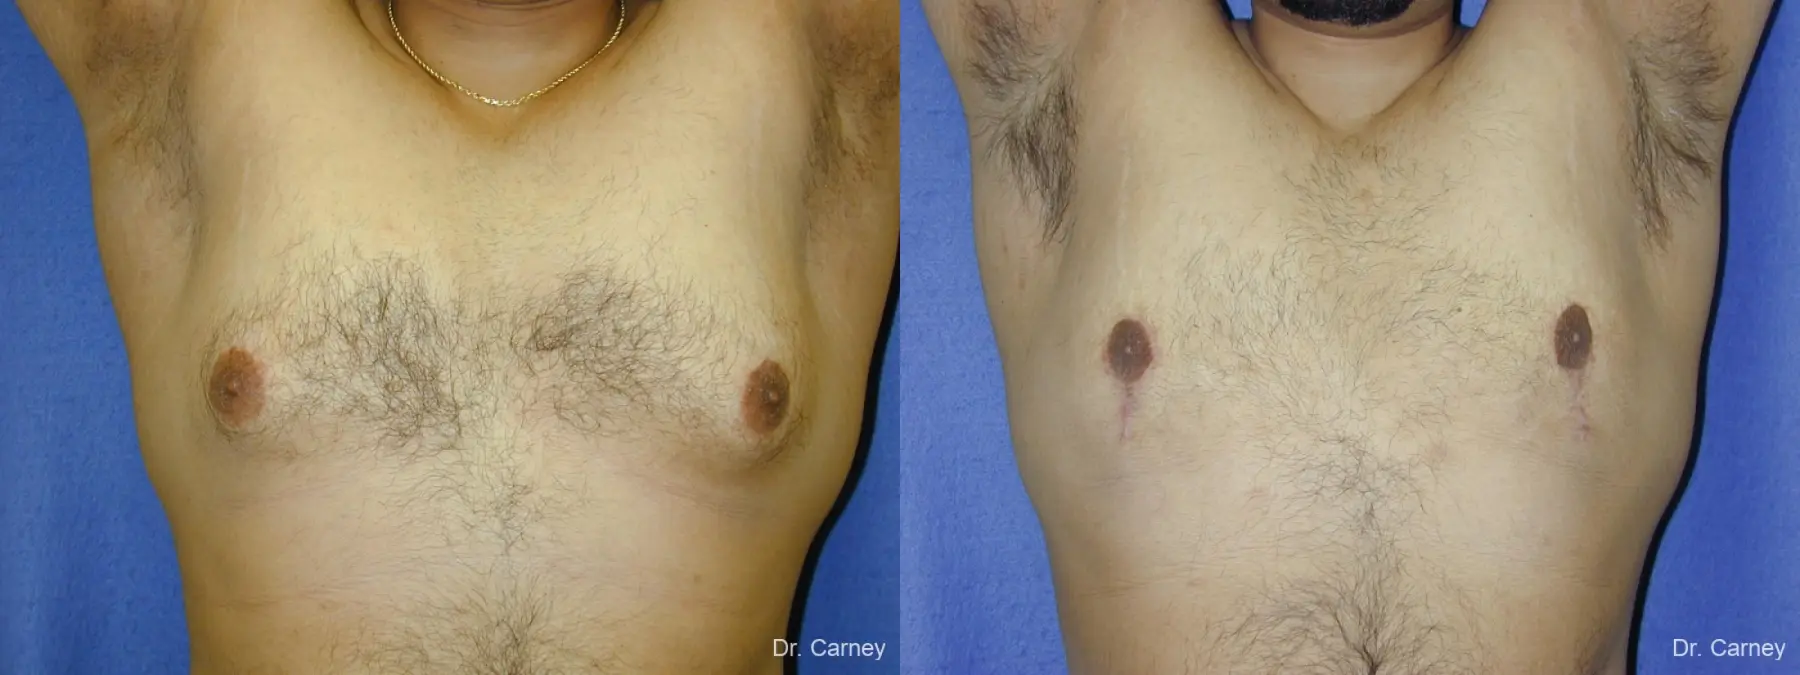 Virginia Beach Gynecomastia 1255 - Before and After 2